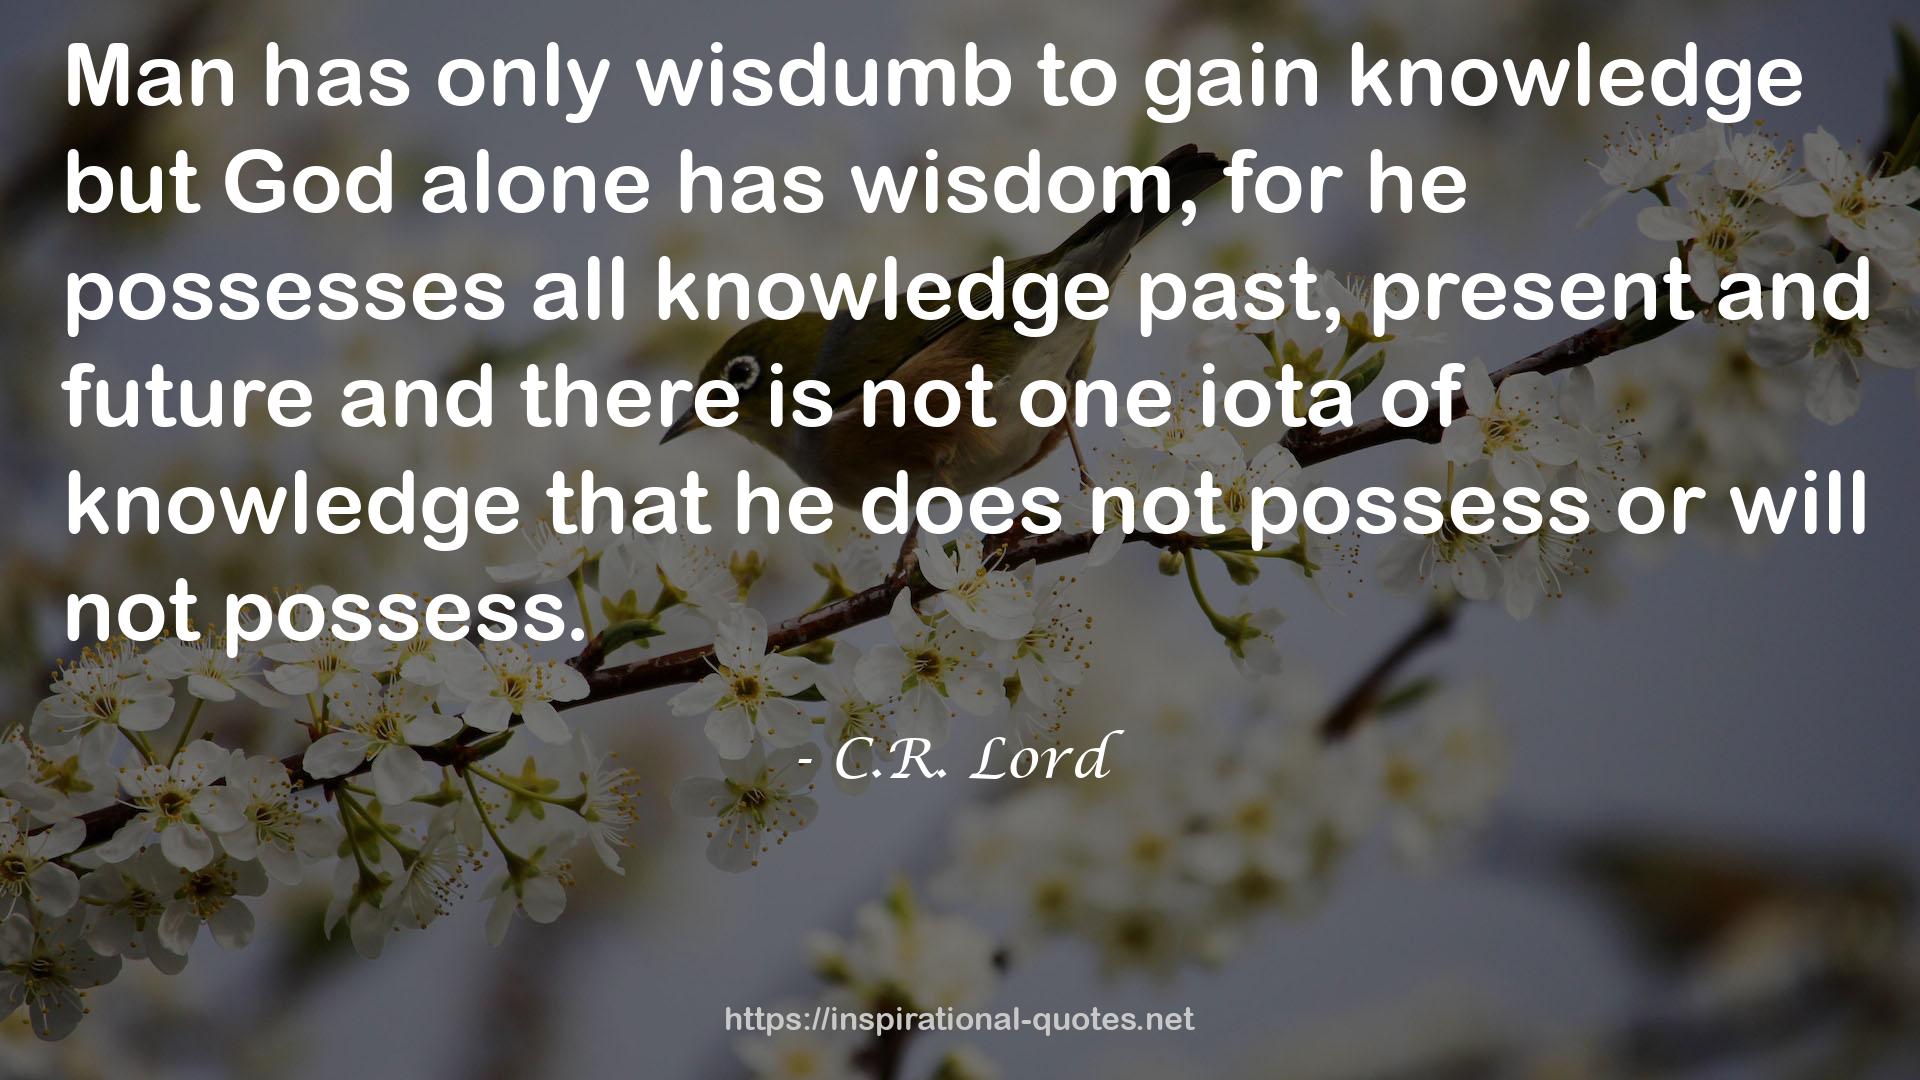 C.R. Lord QUOTES